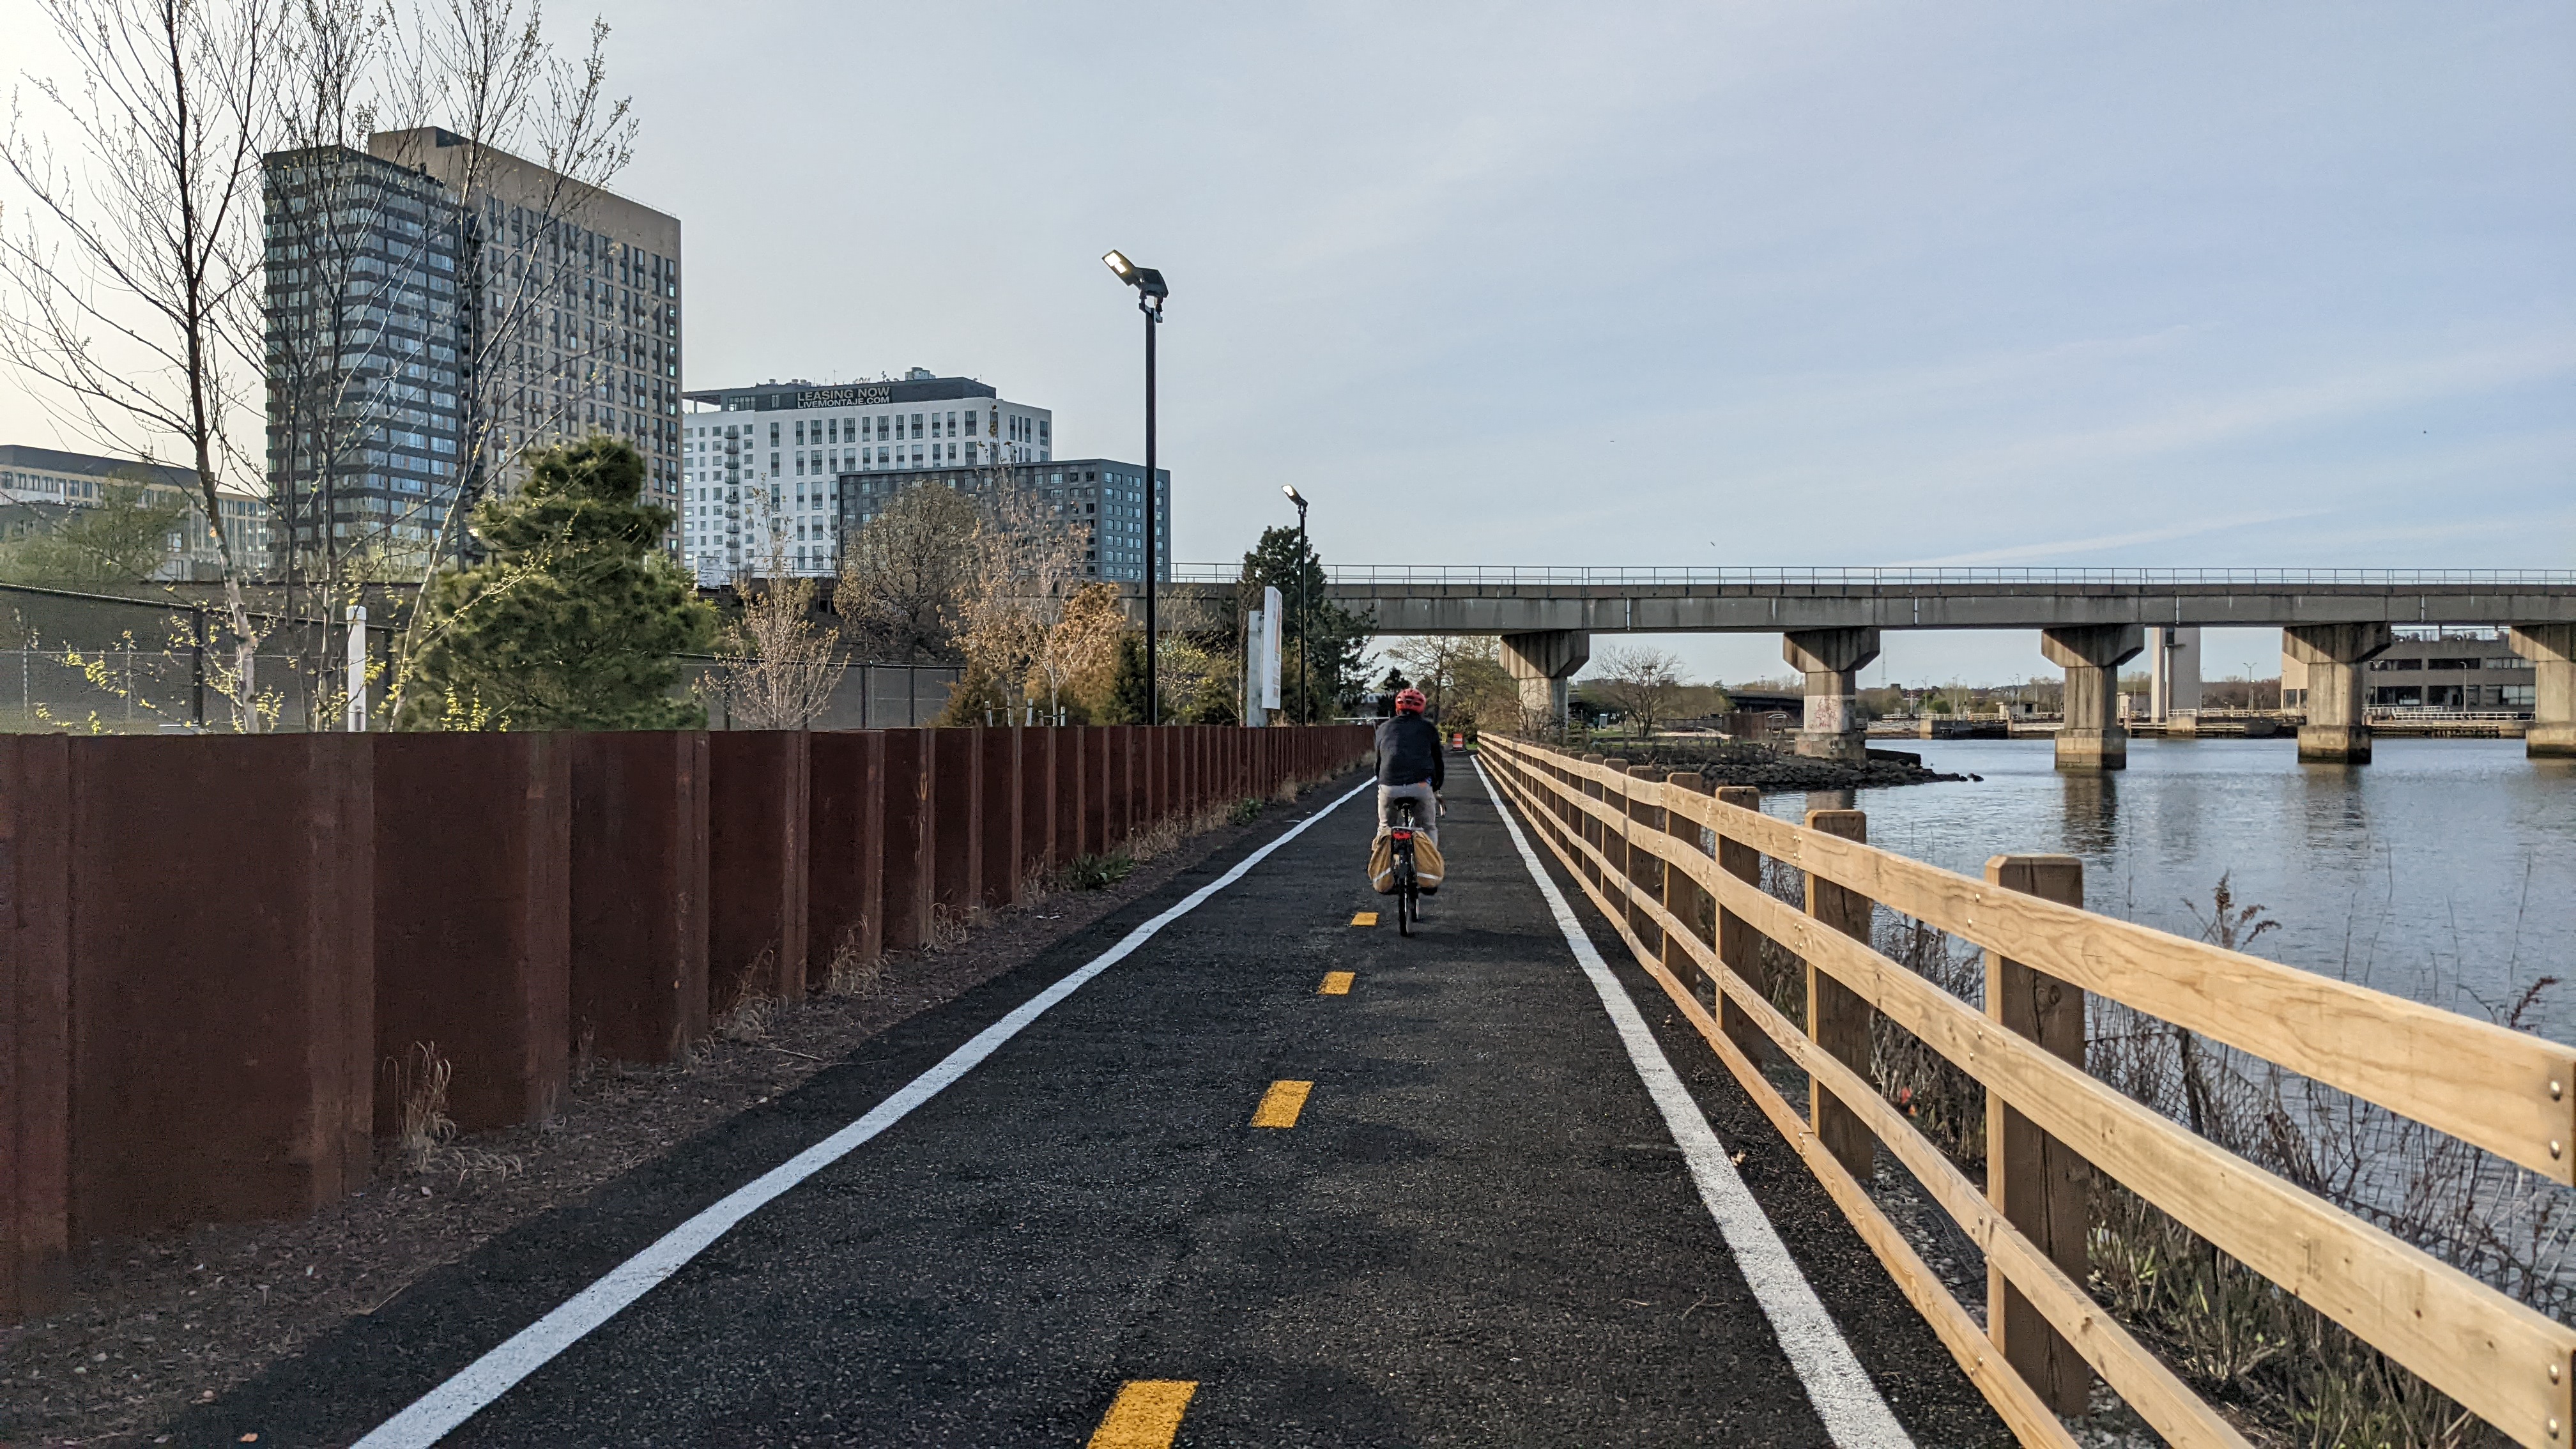 StreetsblogMASS editor Christian MilNeil rides along the new Charlestown Seawall trail towards Assembly Square (whose towers are visible in the background at left). The Mystic River is on the right.